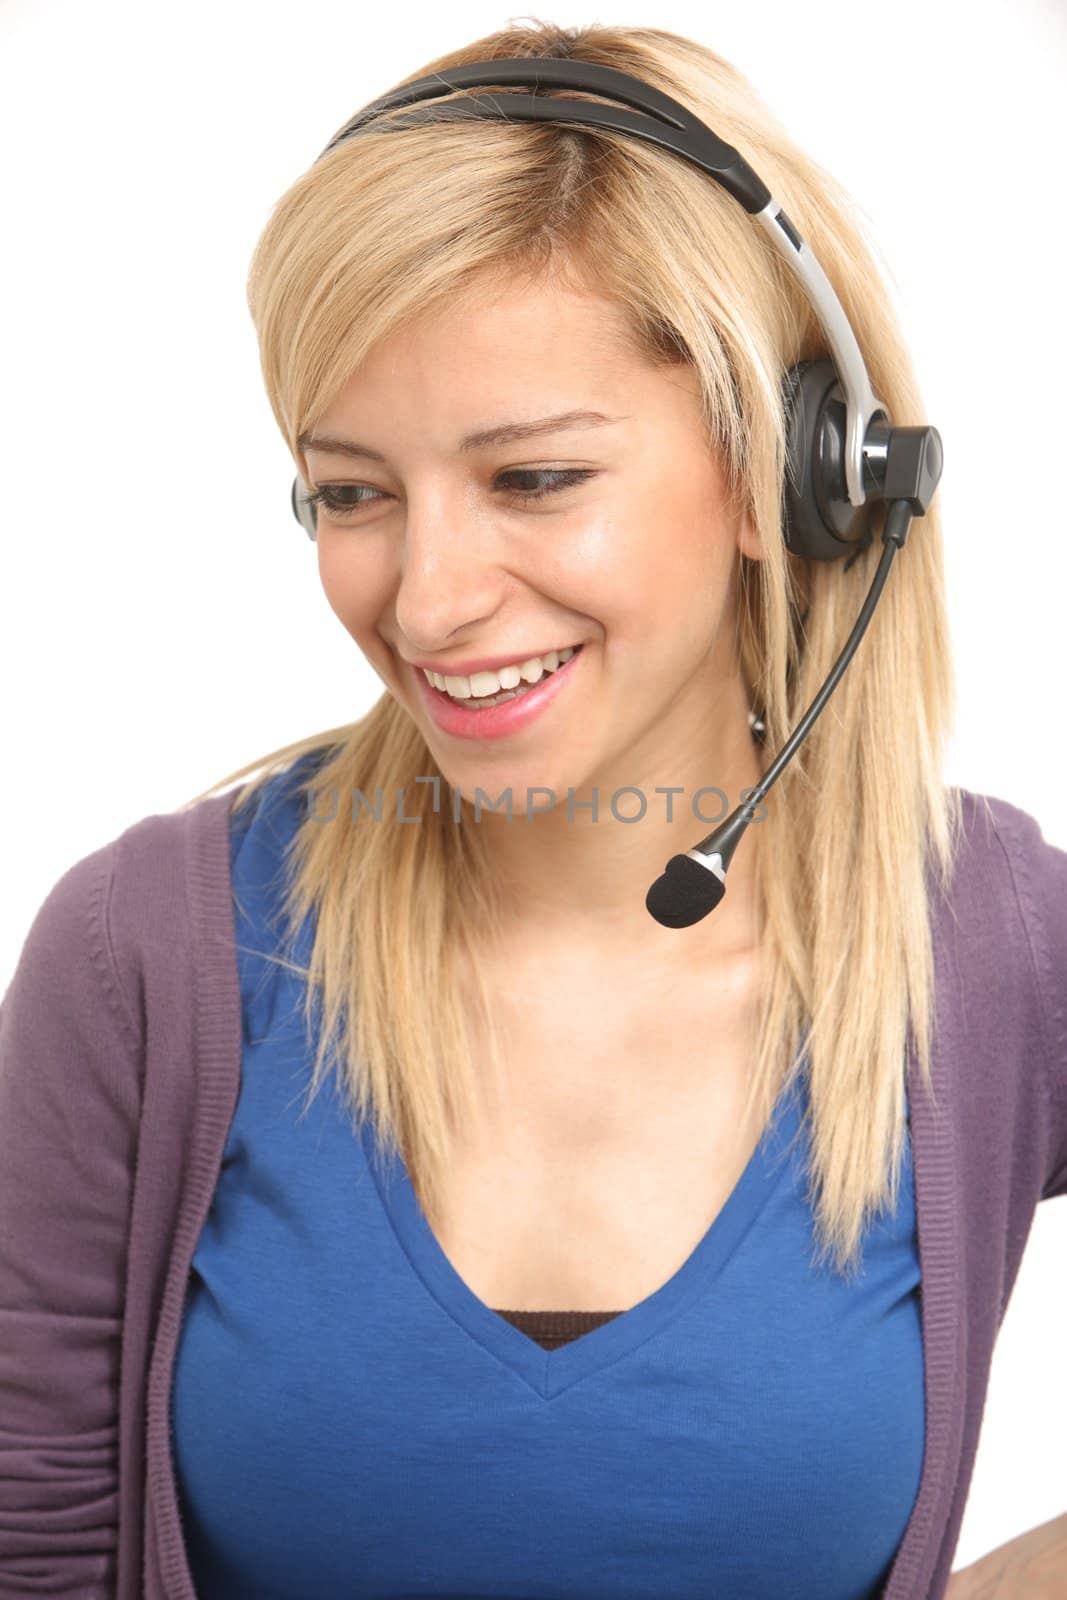 A smiling blonde girl answering with a headset